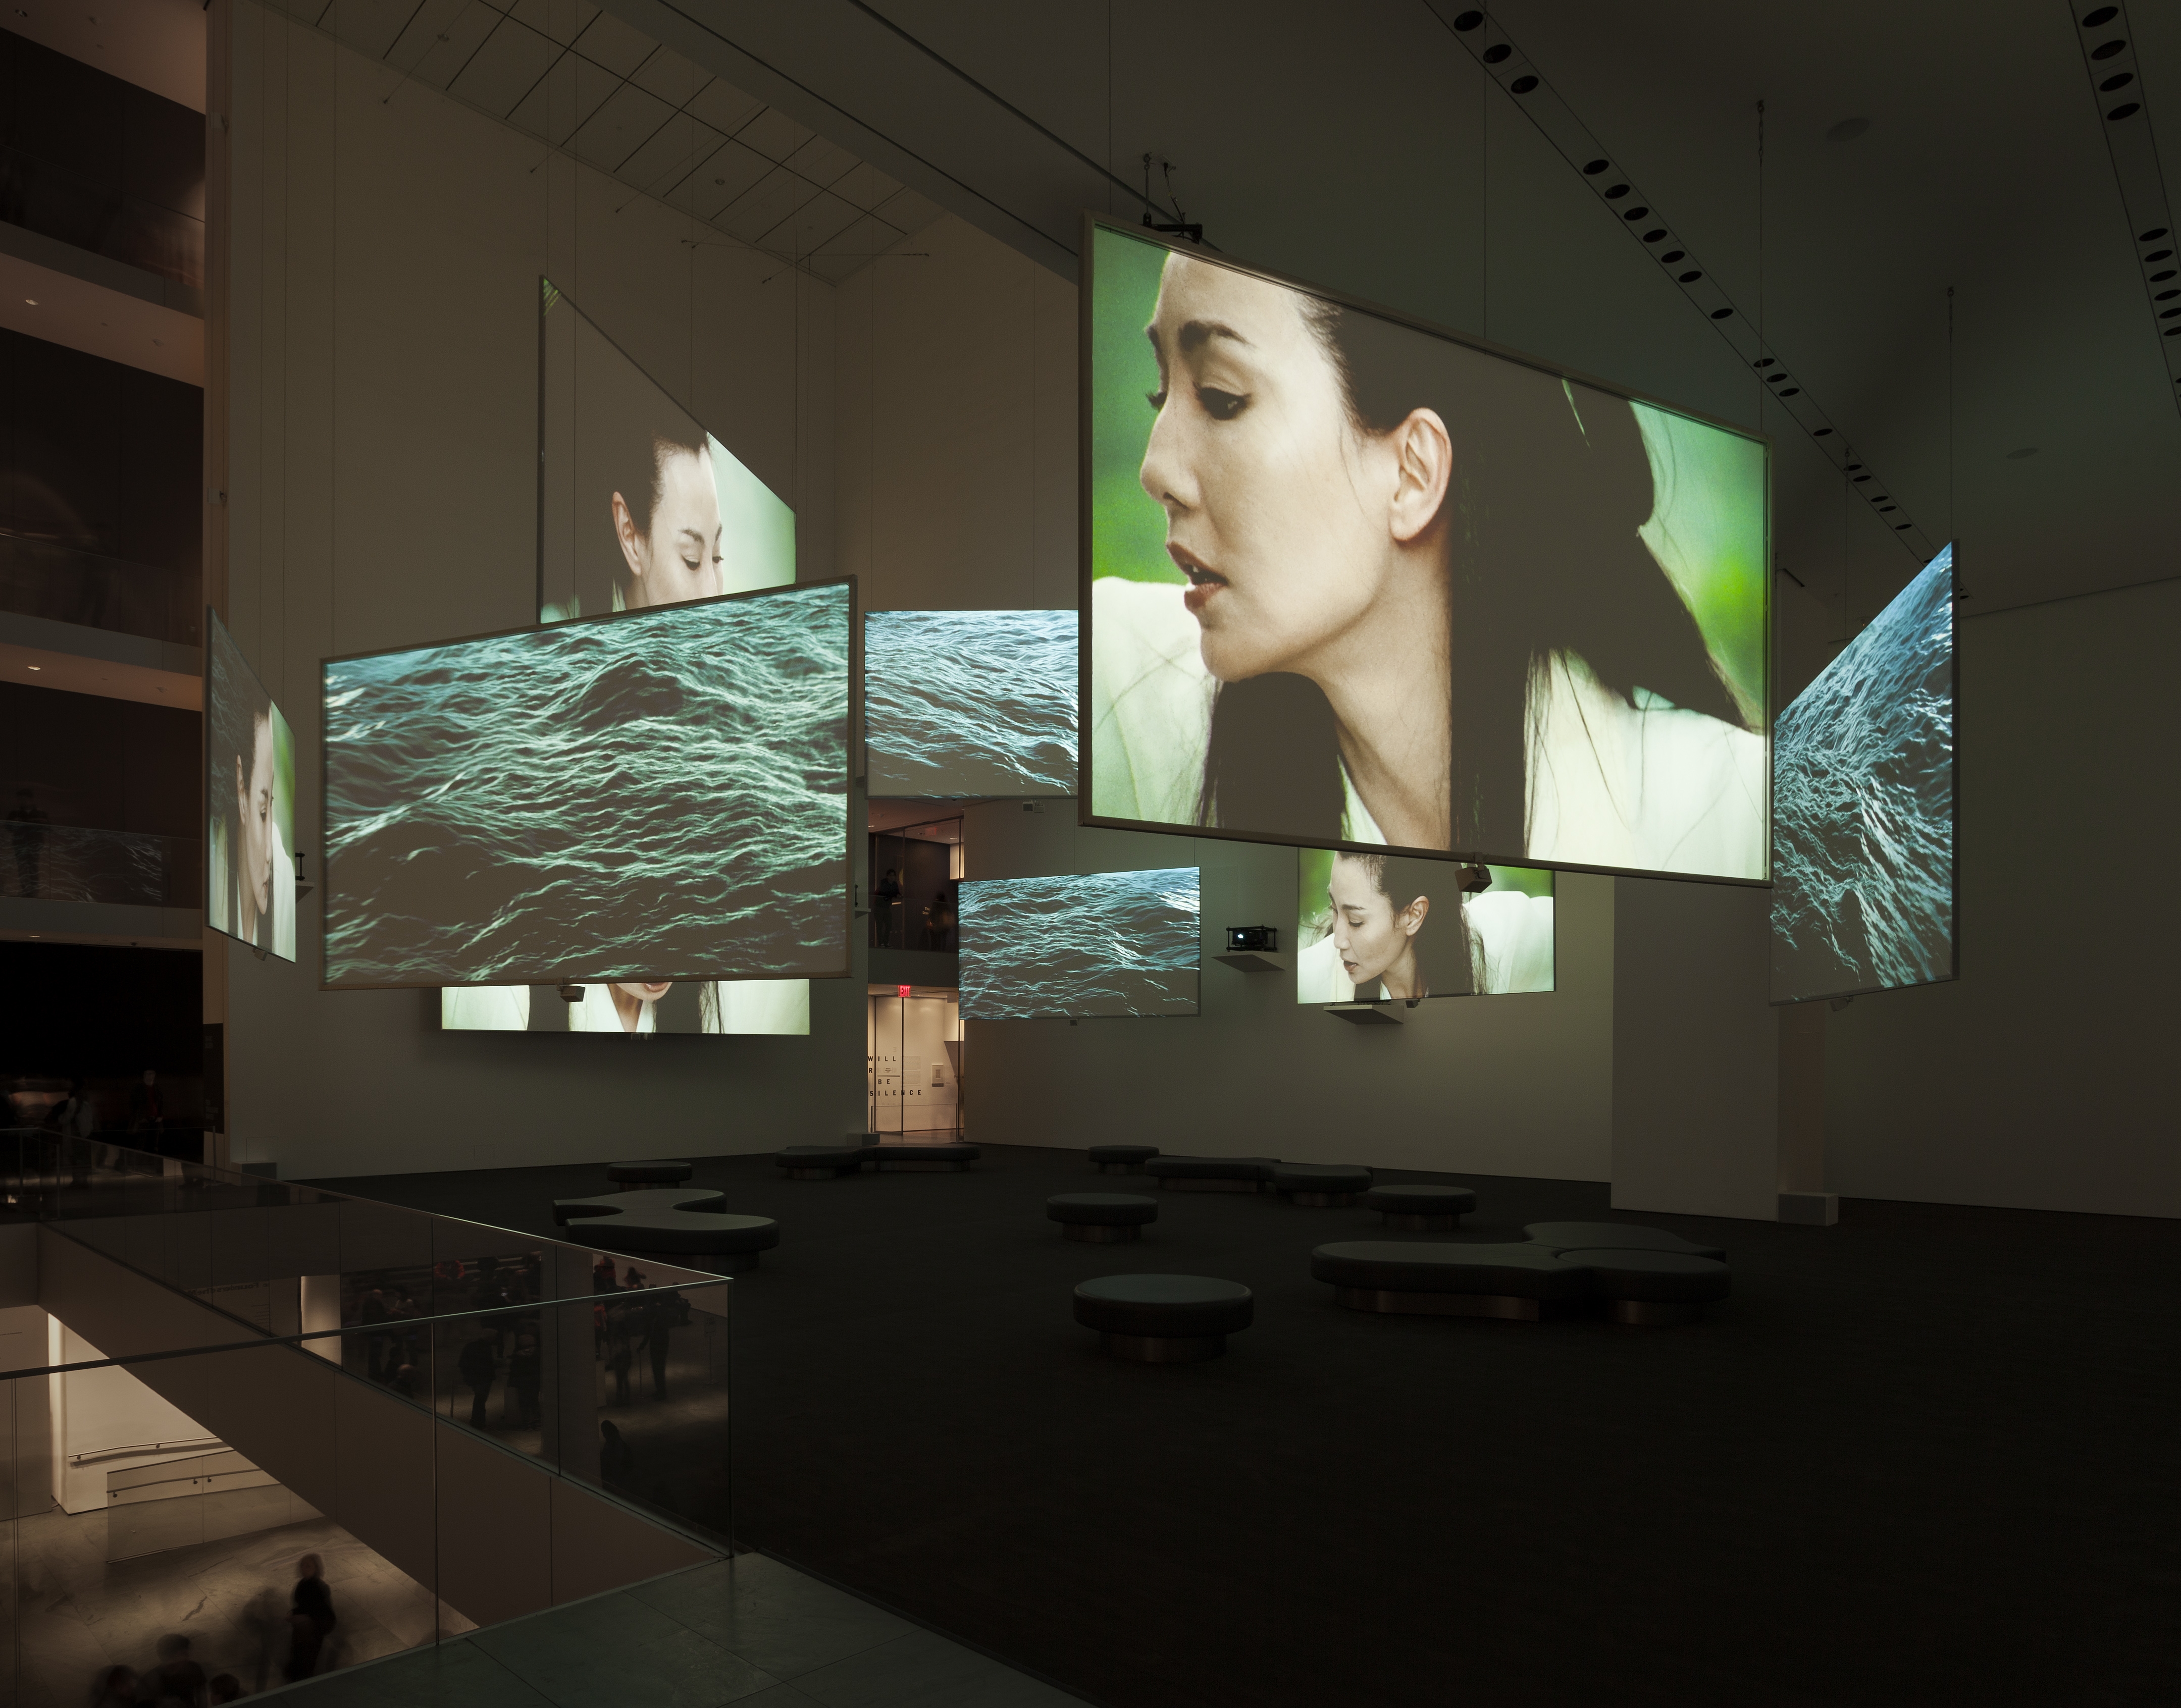 Isaac Julien, Ten Thousand Waves, 2010. Nine-screen installation, 35mm film transferred to High Definition, 9.2 surround sound, 49' 41". Installation view, the Museum of Modern Art, New York, 2013. Courtesy of the artist, Metro Pictures Gallery, New York and Victoria Miro, London/Venice. Photographer: Jonathan Muzikar